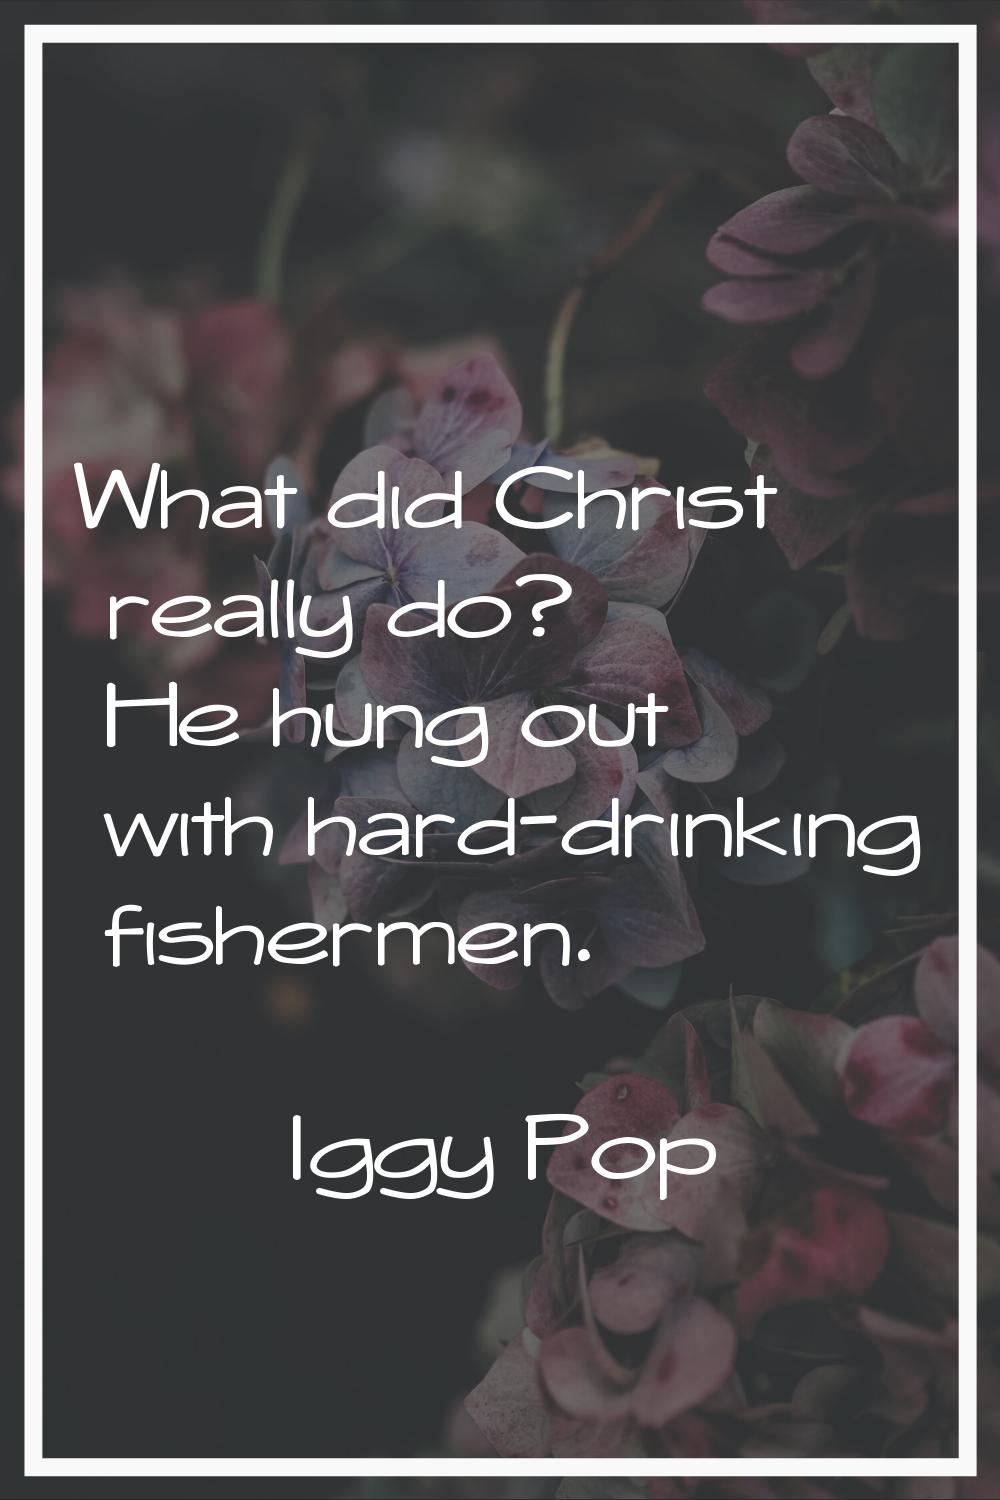 What did Christ really do? He hung out with hard-drinking fishermen.